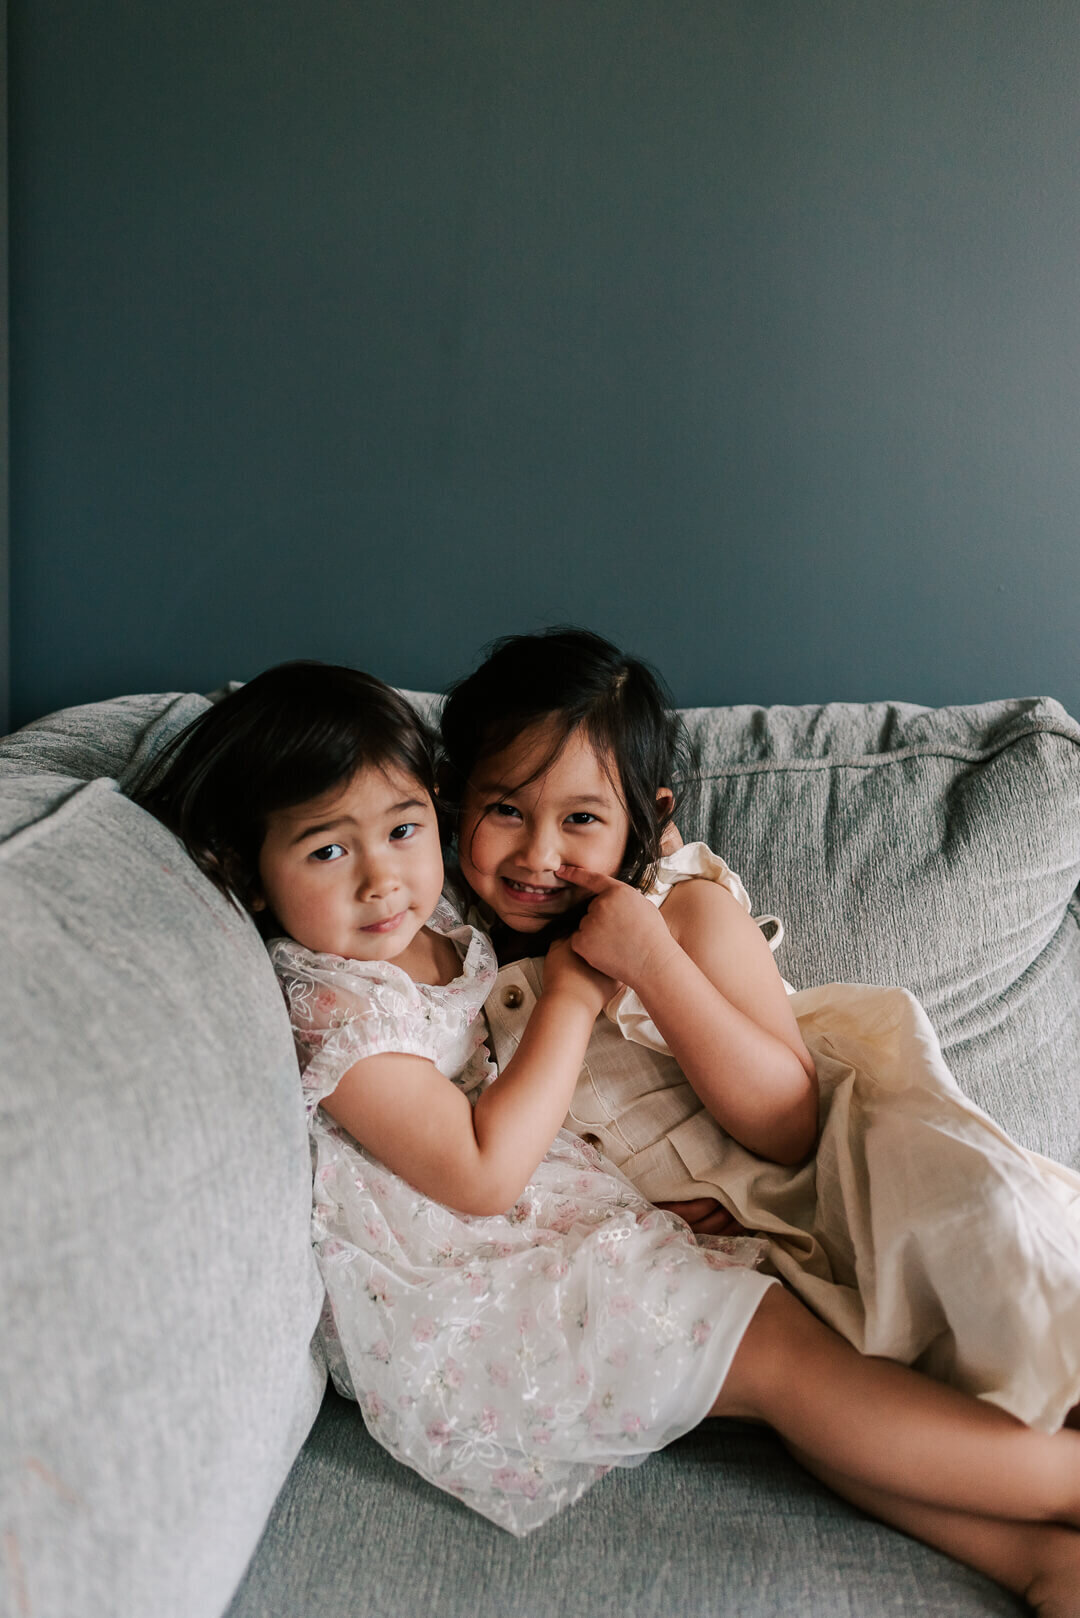 Two young sisters hugging each other on their sofa and having fun together